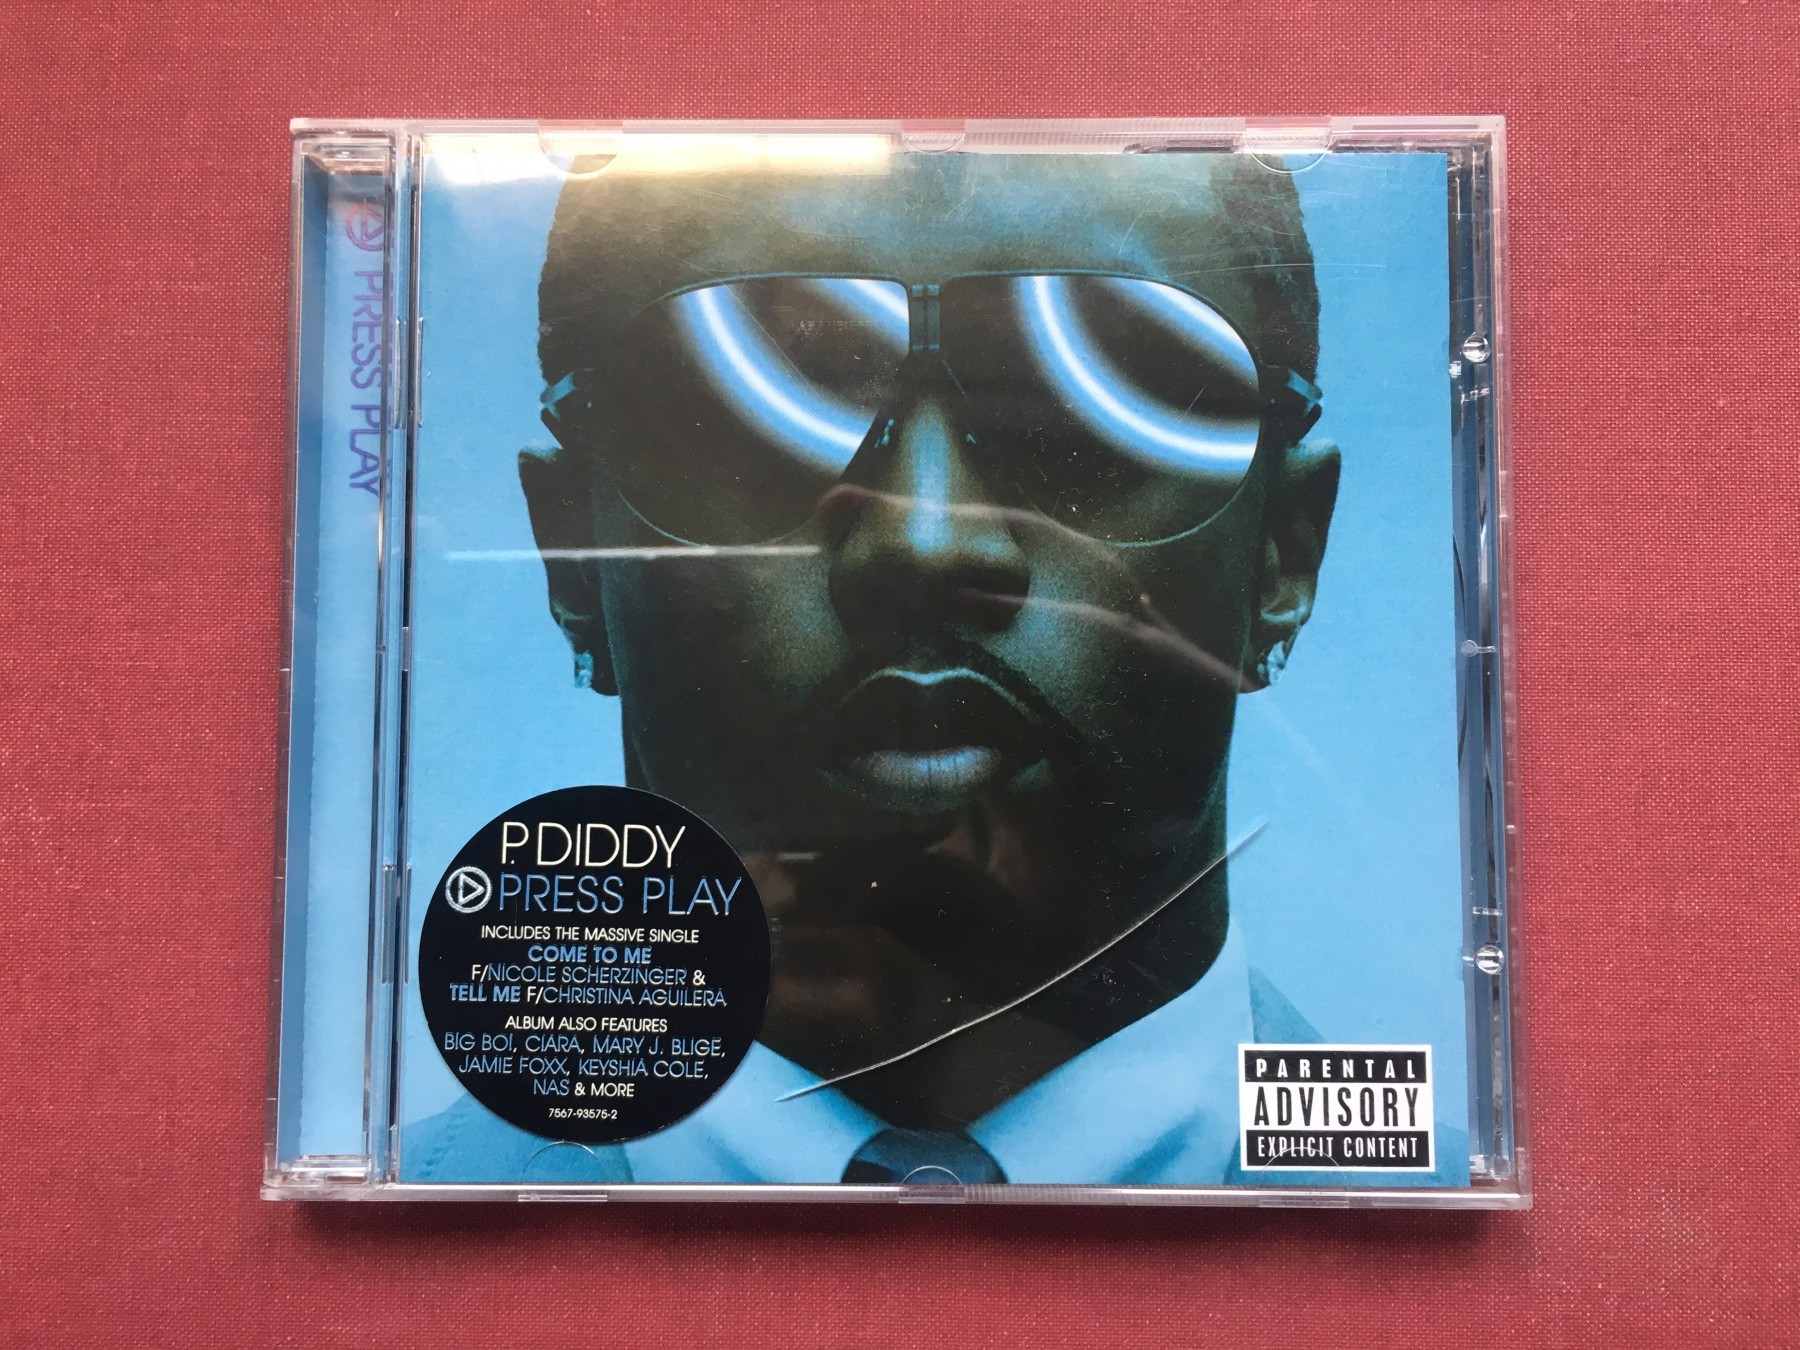 Press Play [PA] by P. Diddy/Diddy (CD, Oct-2006, Bad Boy Entertainment)